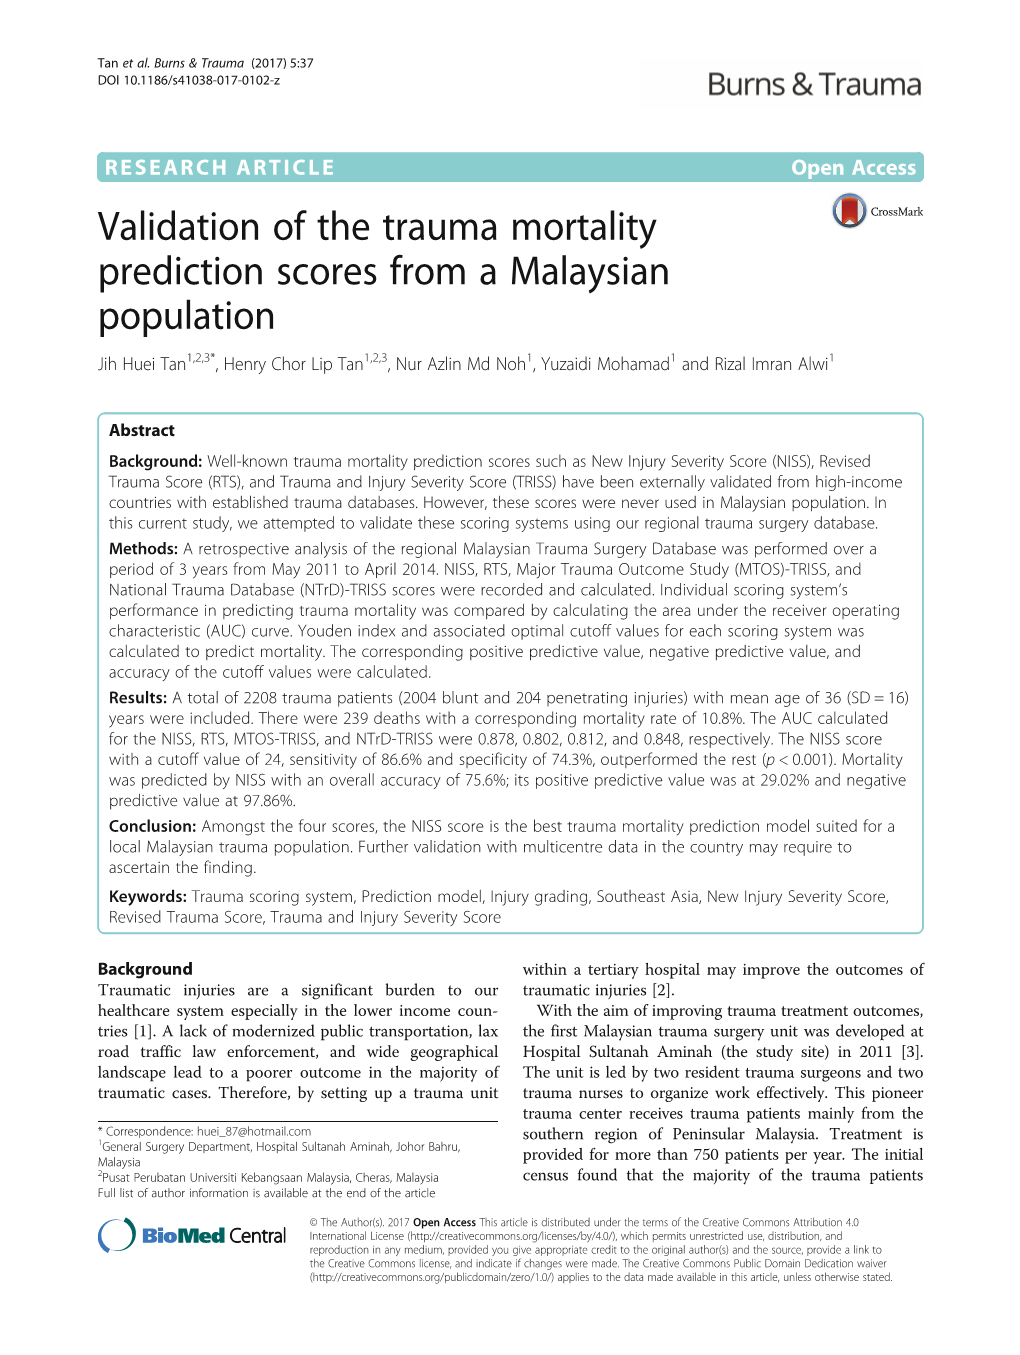 Validation of the Trauma Mortality Prediction Scores from a Malaysian